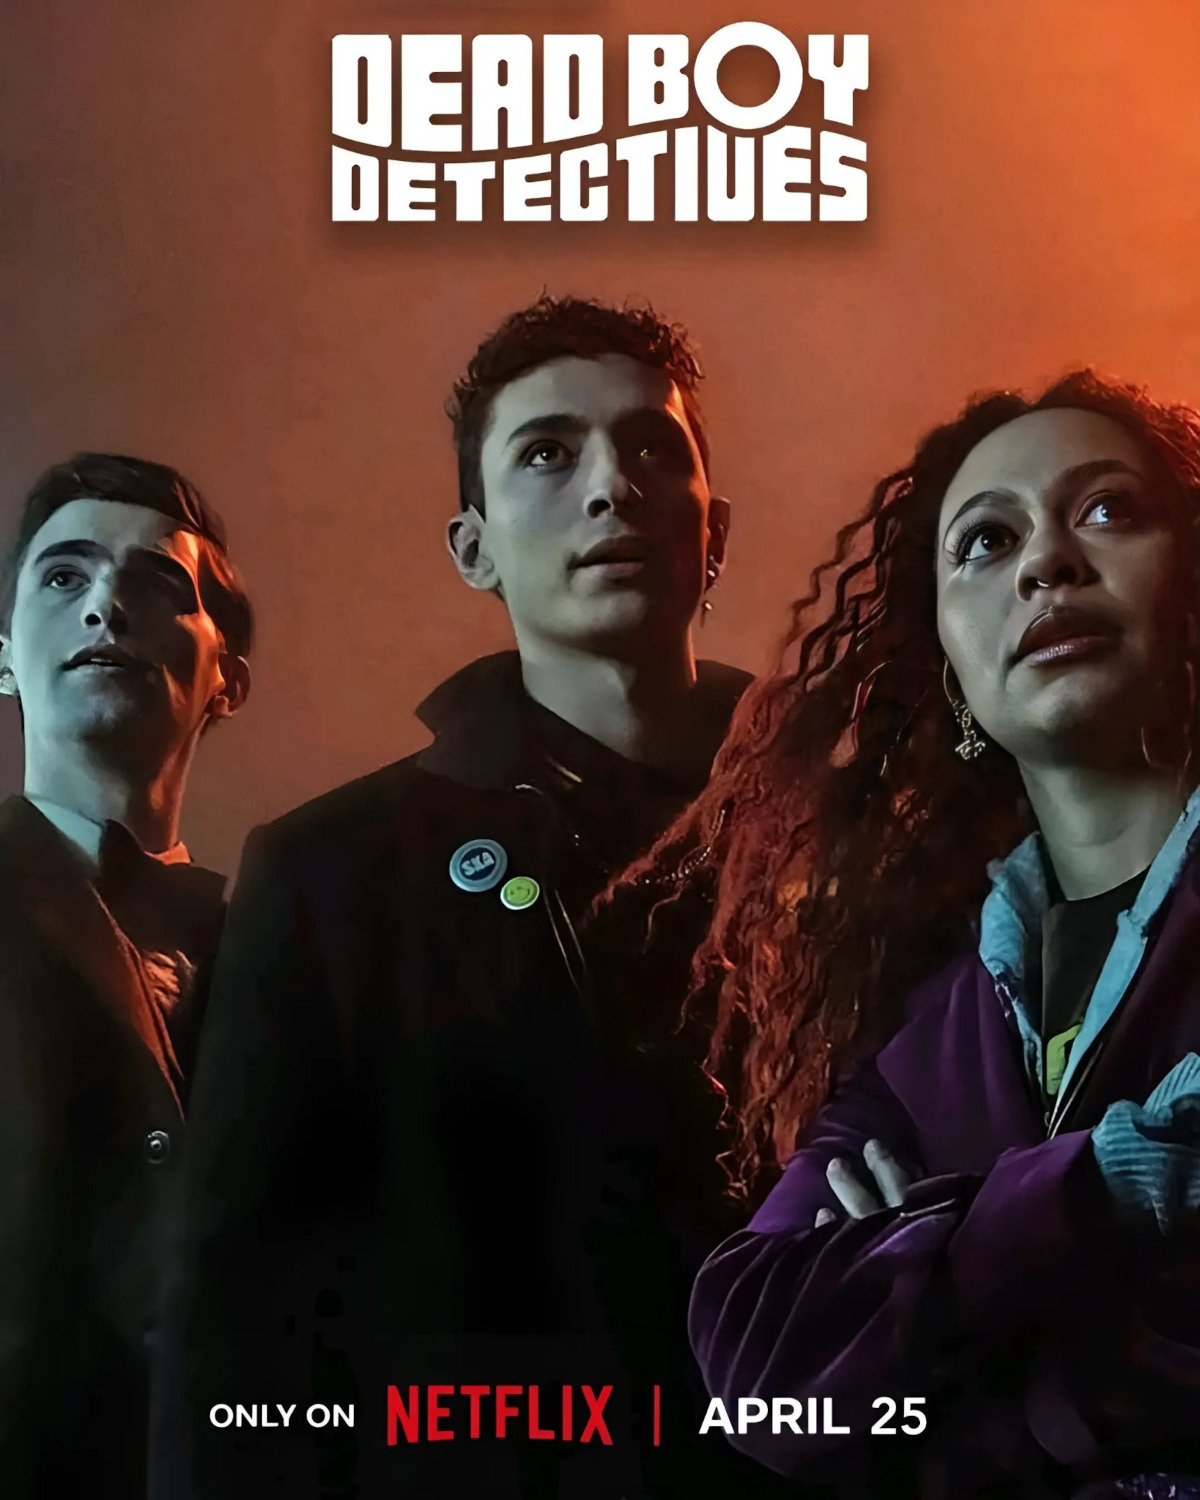 Extra Large TV Poster Image for Dead Boy Detectives (#1 of 11)